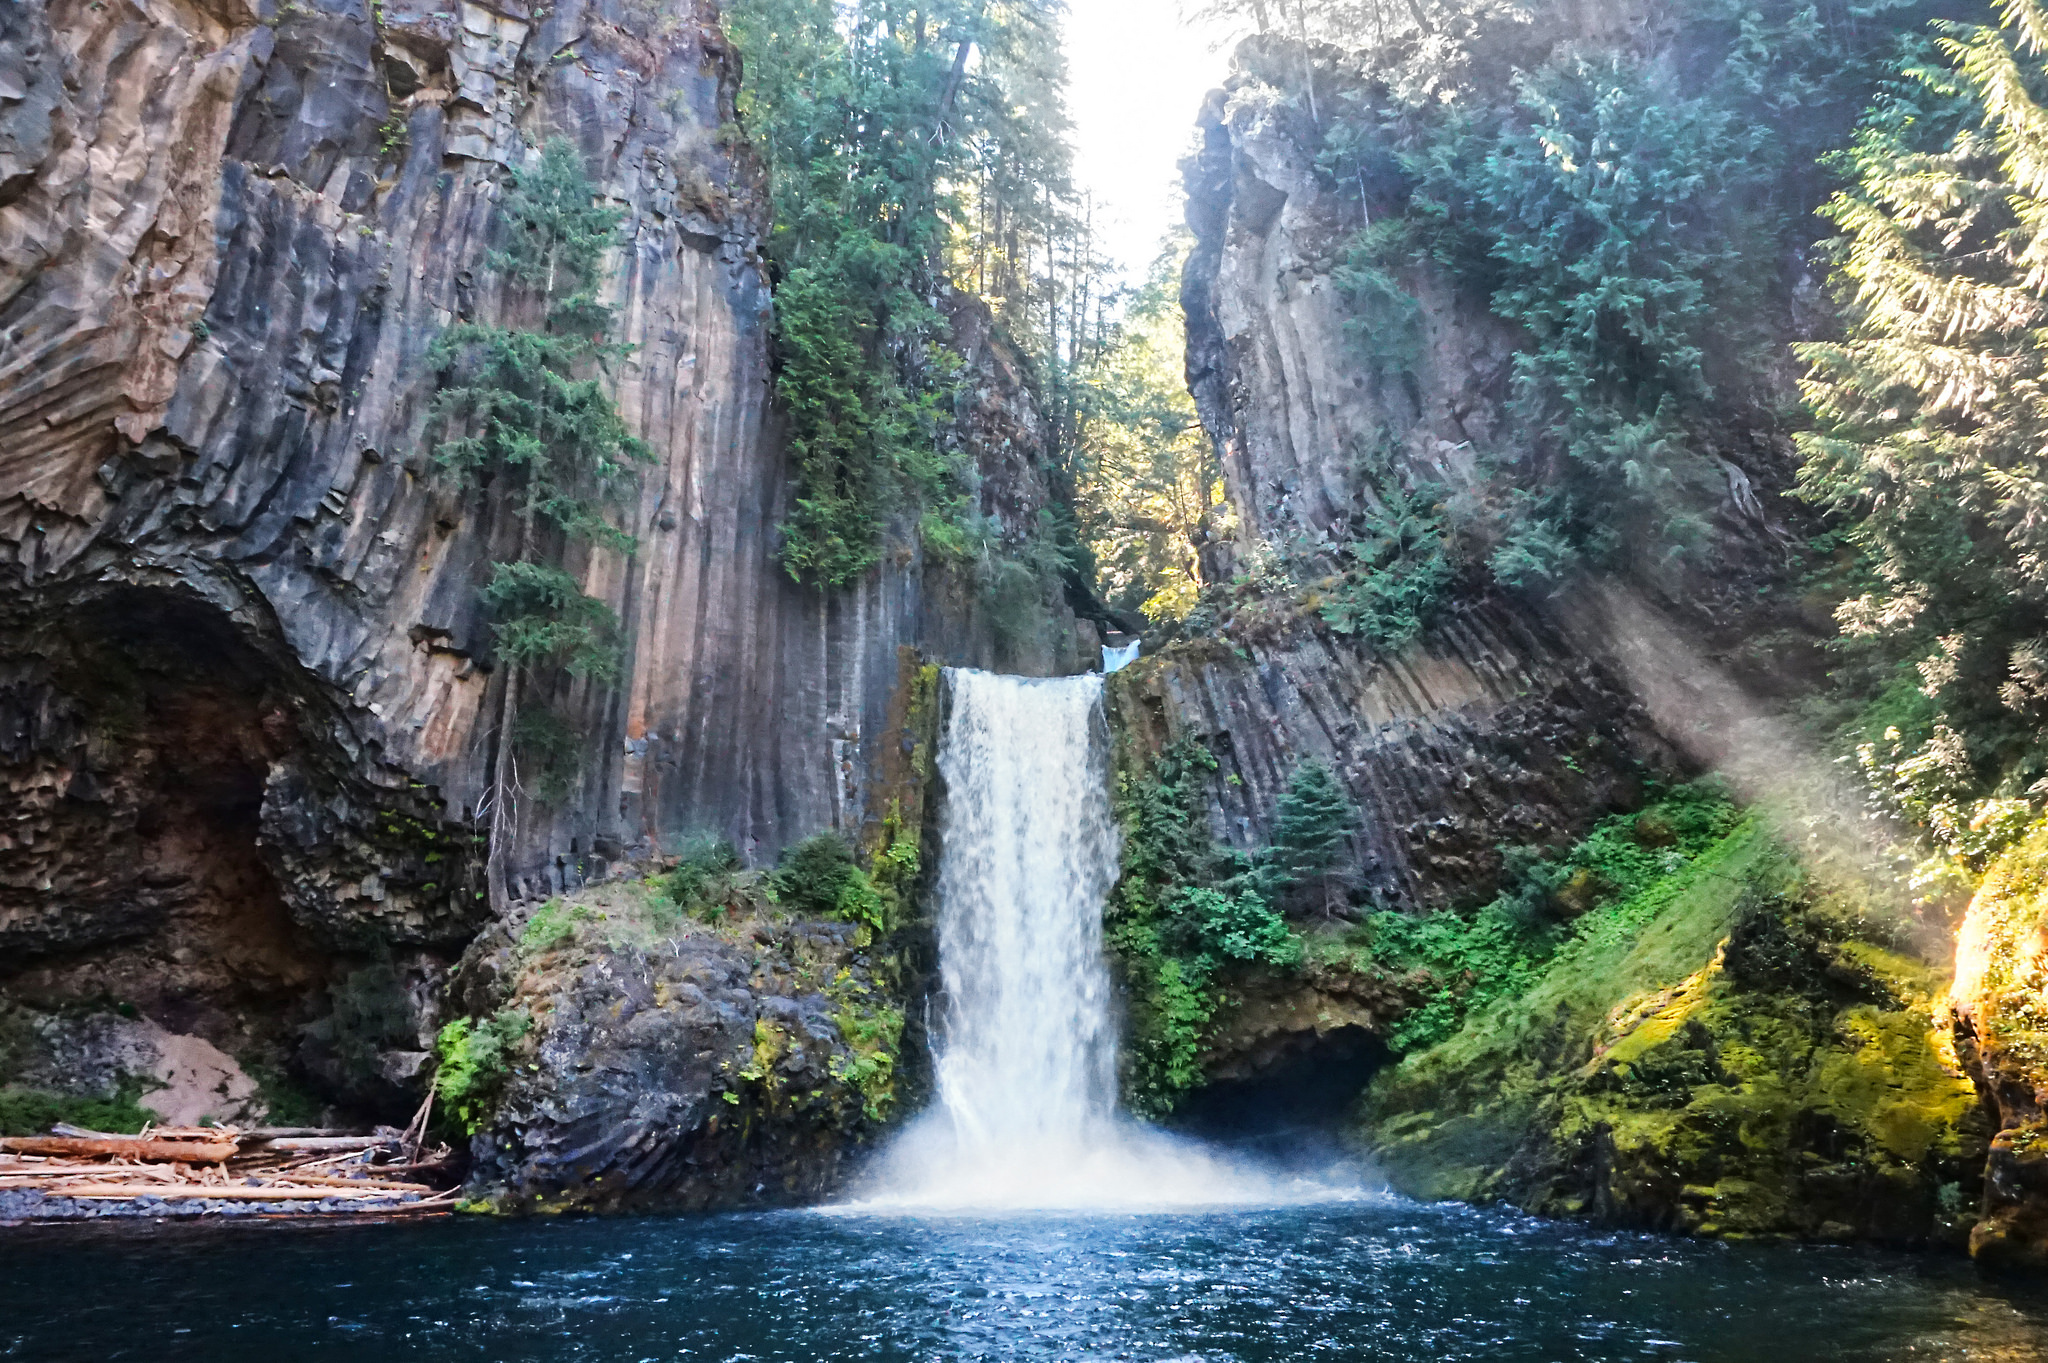 places to visit in oregon in august